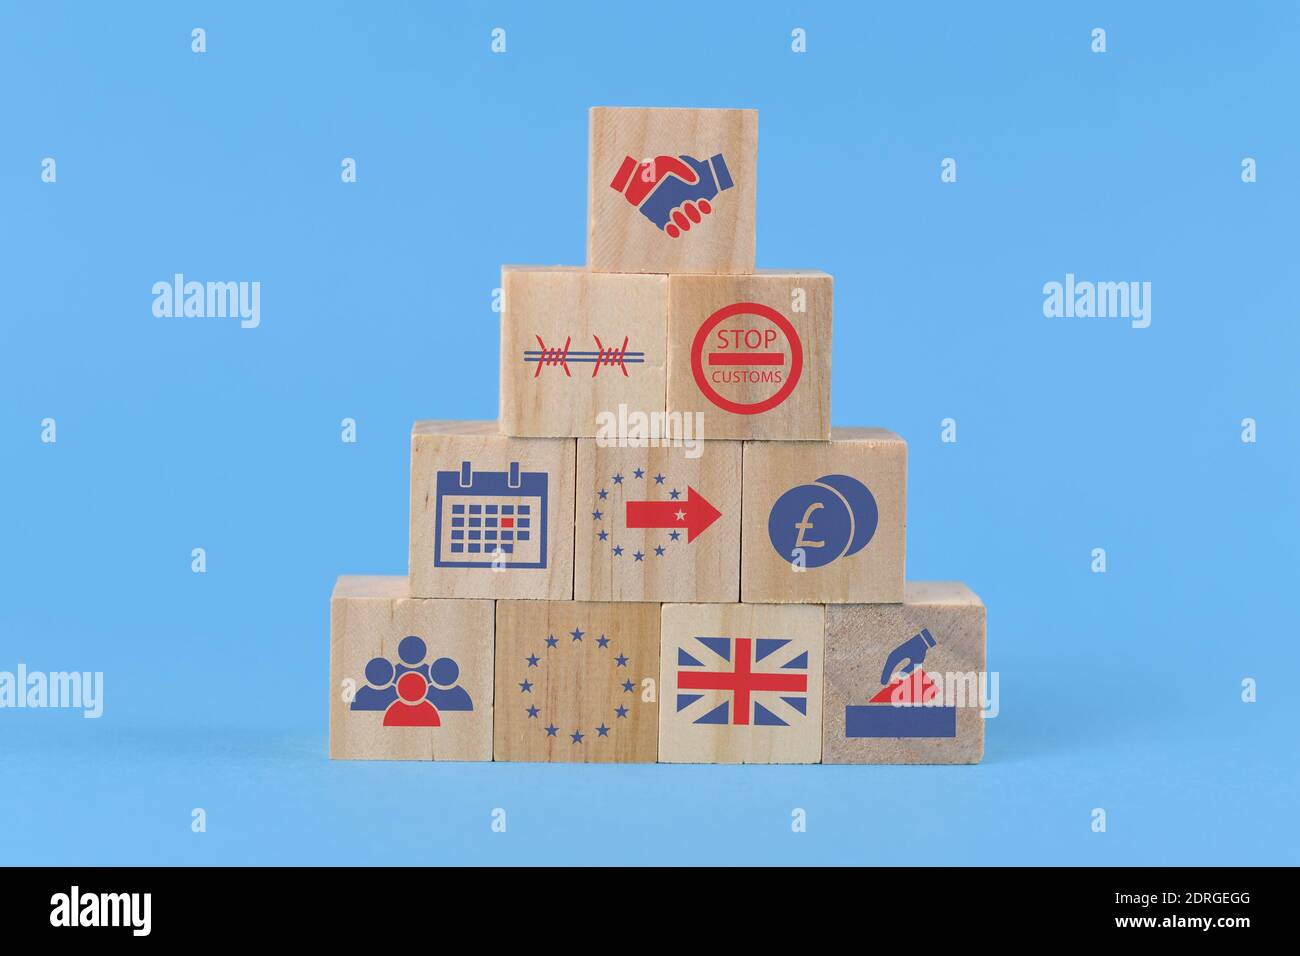 Brexit negotiation concept with wooden cubes showing icons related to England leaving the European Union Stock Photo